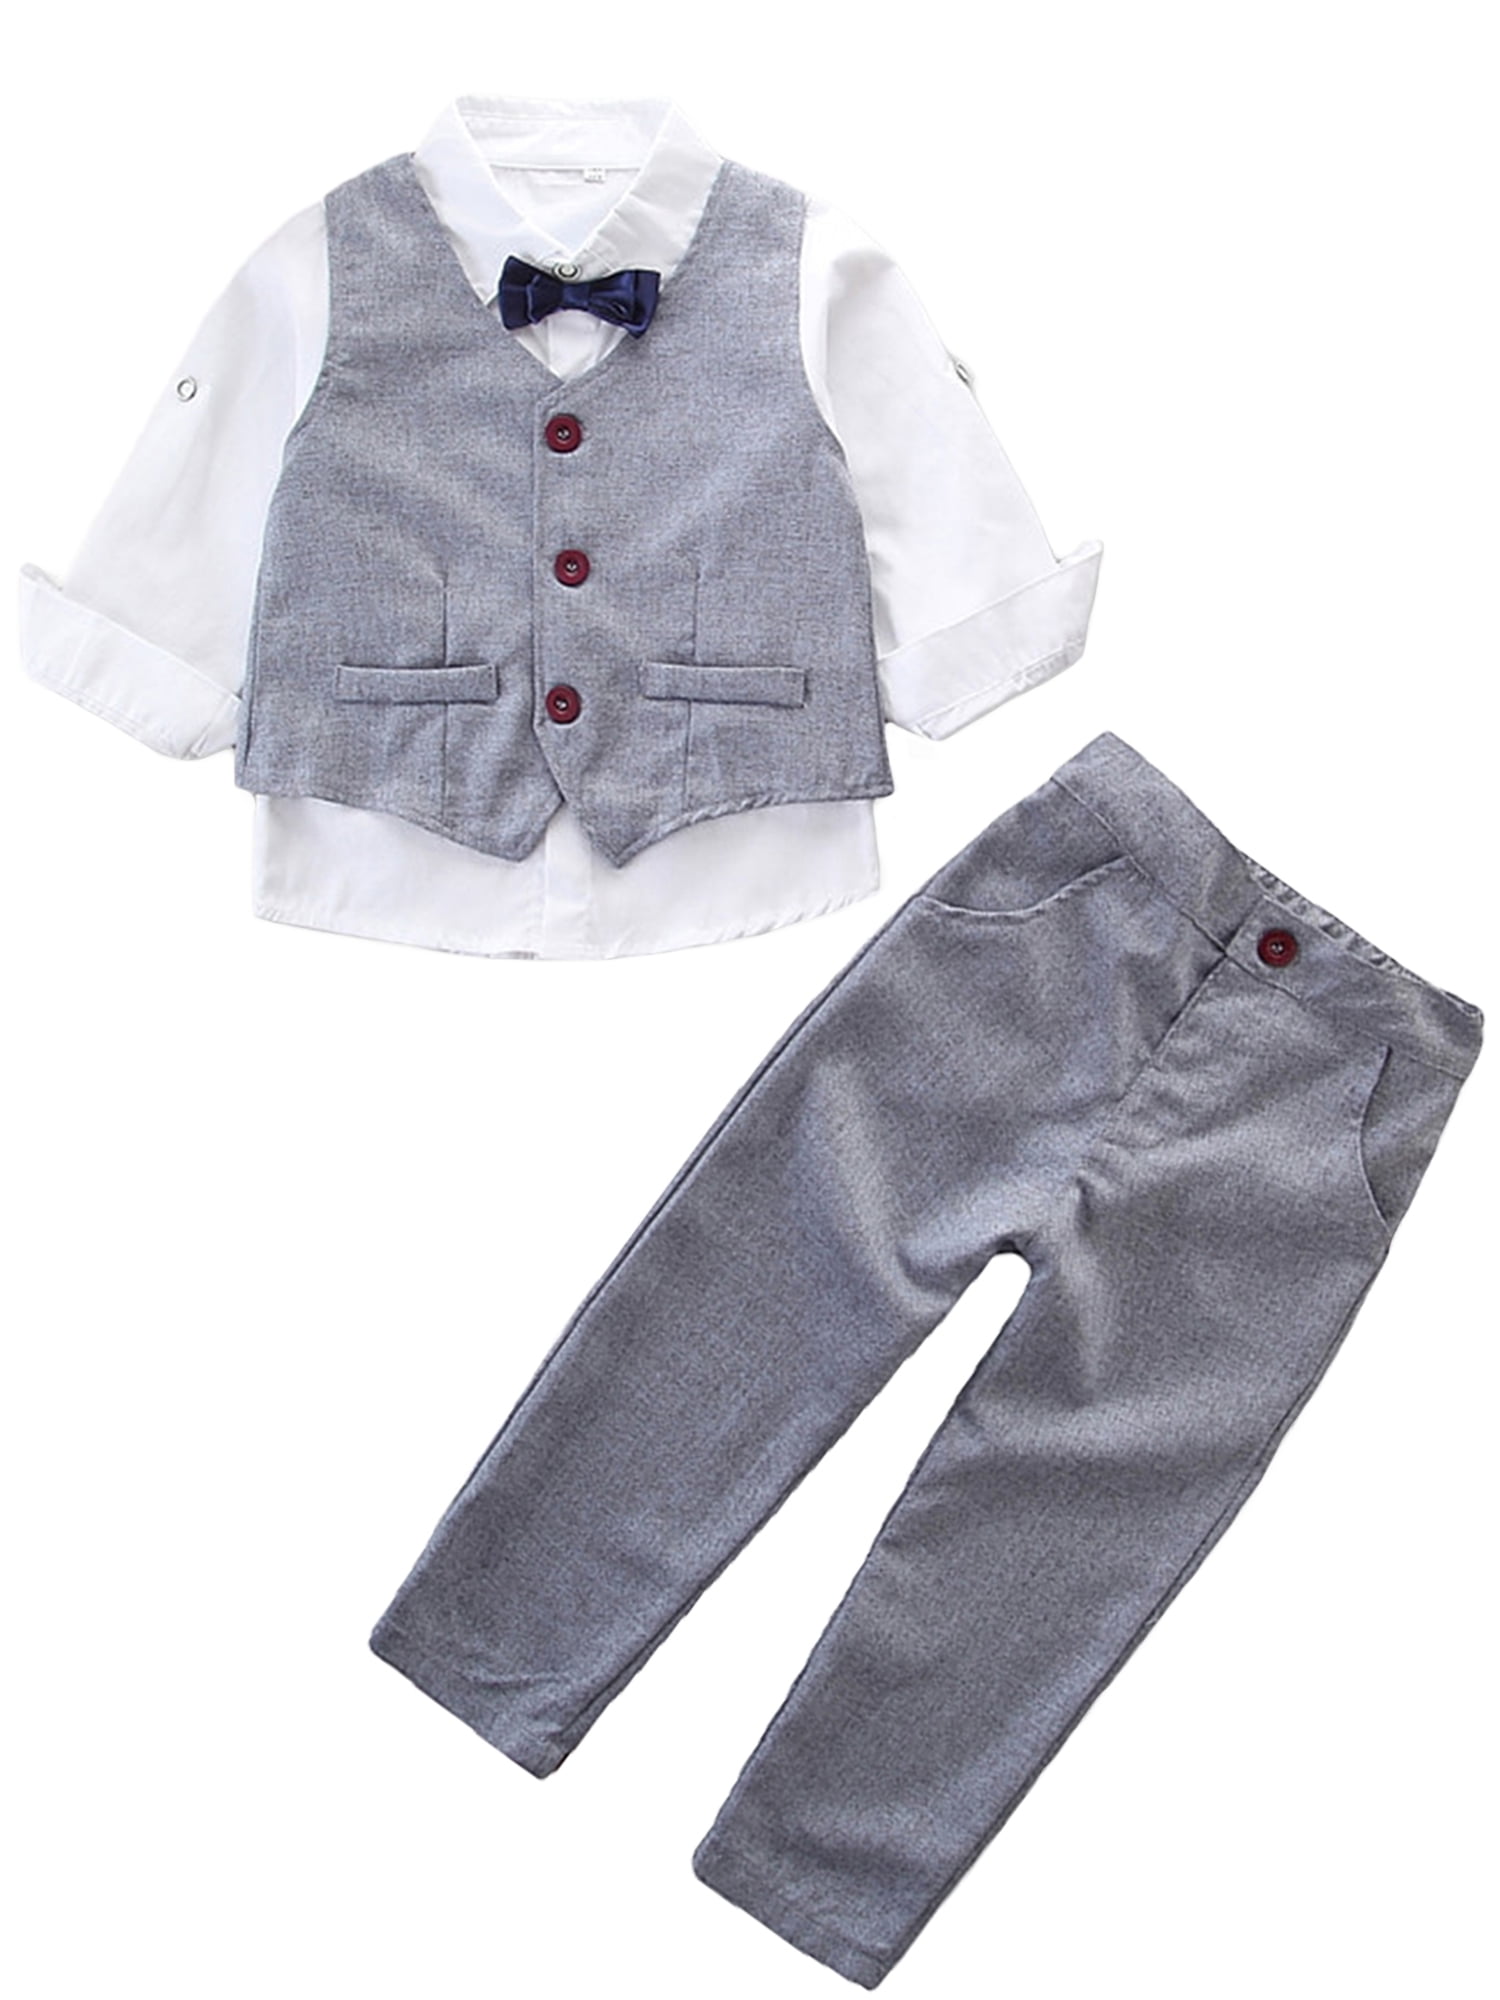 LAPAKIDS Kids Toddler Baby Boy Formal Suit Long Sleeve Gentlemen Bow Tie  Shirts + Vests + Pants Outfit Sets 4-5T 